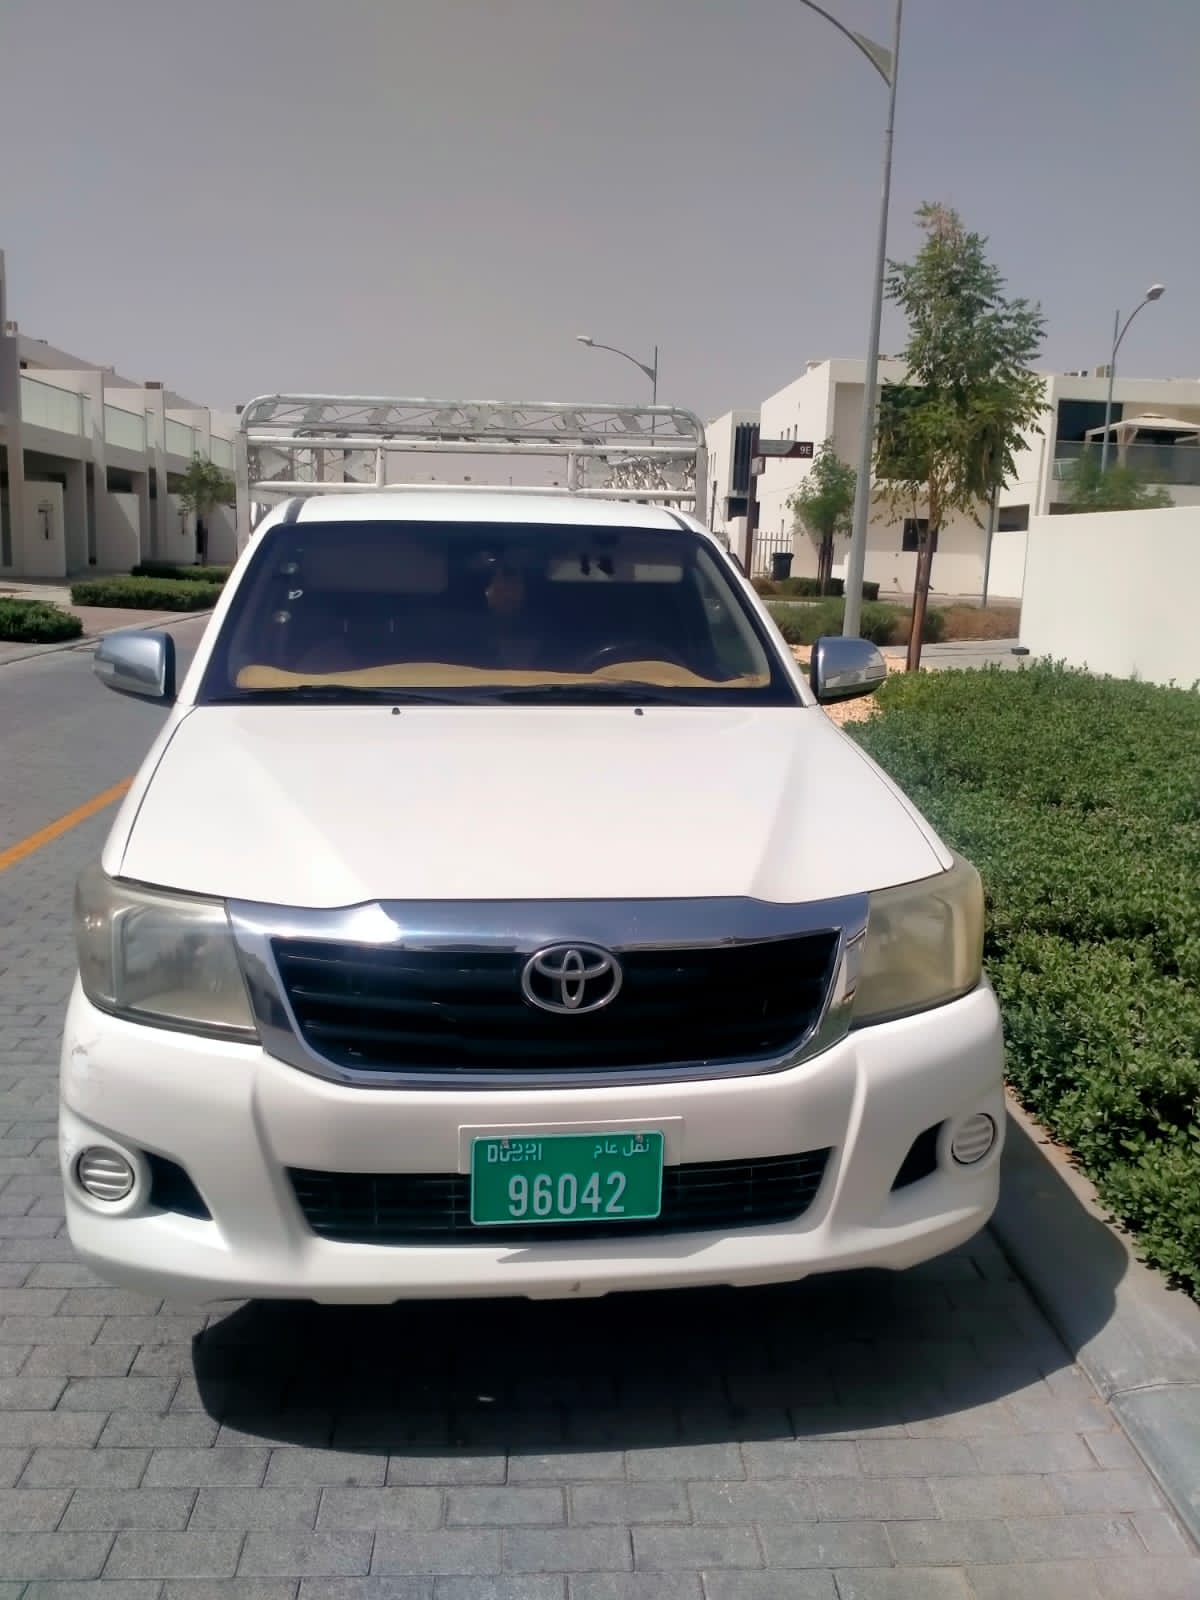 Dubai Movers and Packers, Movers and Packers in Business Bay, Movers and Packers in Palm Jumeirah, 0509883158., Movers in Al Barsha 1 | Movers And Packers In Ras Al Khaimah | Movers and Packers in Business Bay | Movers and Packers in Ajman | House Movers in Dubai | 3 Ton Pickup For Rent in Dubai | 3 Ton Pickup For Rent in Dubai | 1 Ton Pickup For Rent in Dubai